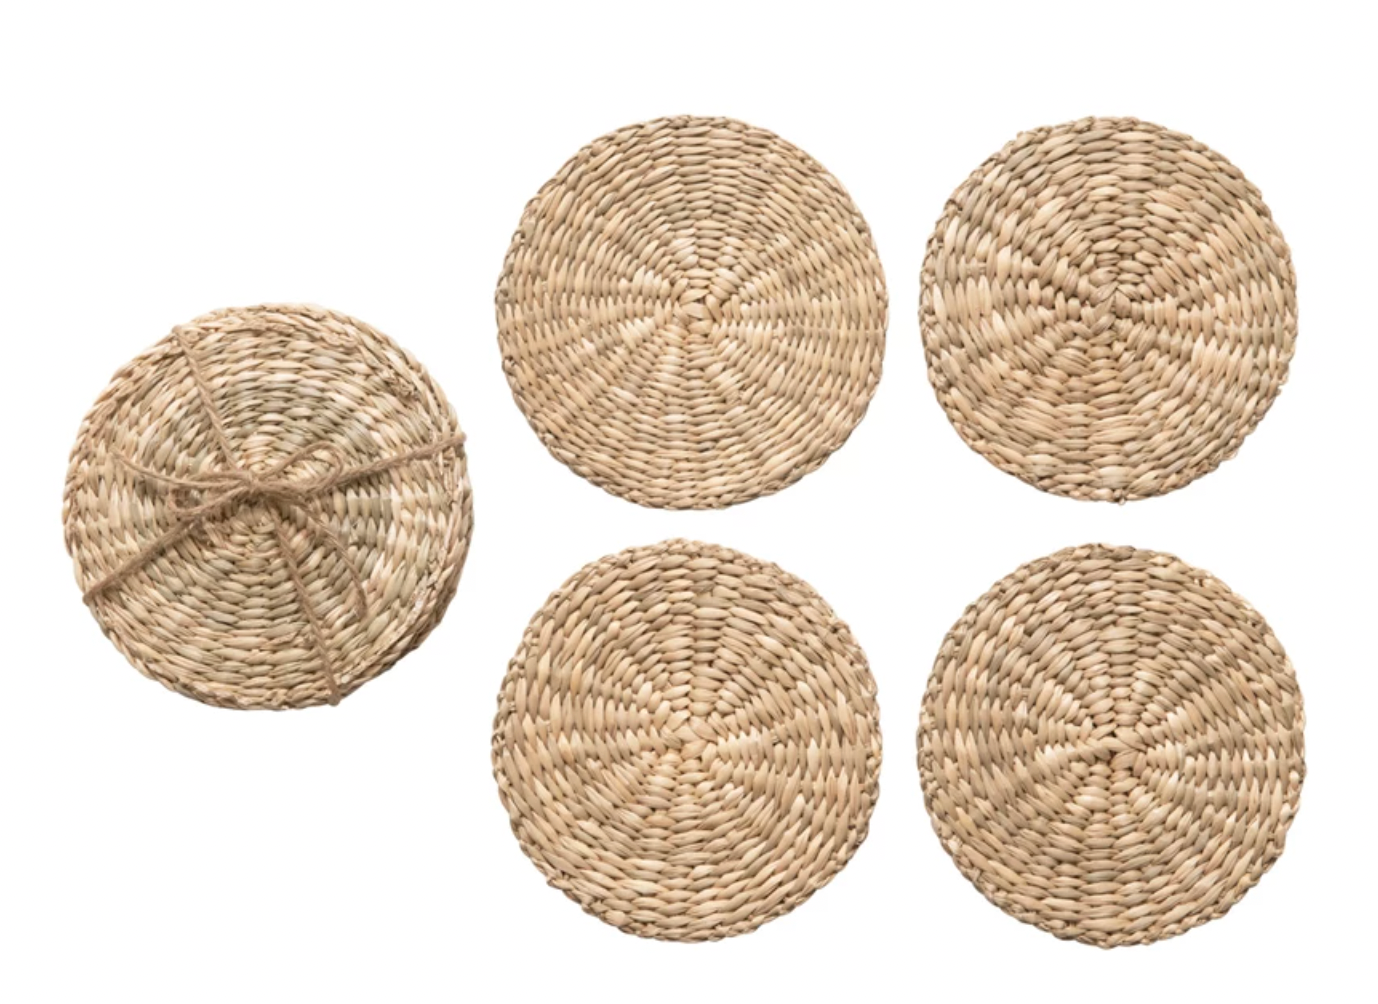 Hand-Woven Seagrass Coasters, Set of 4